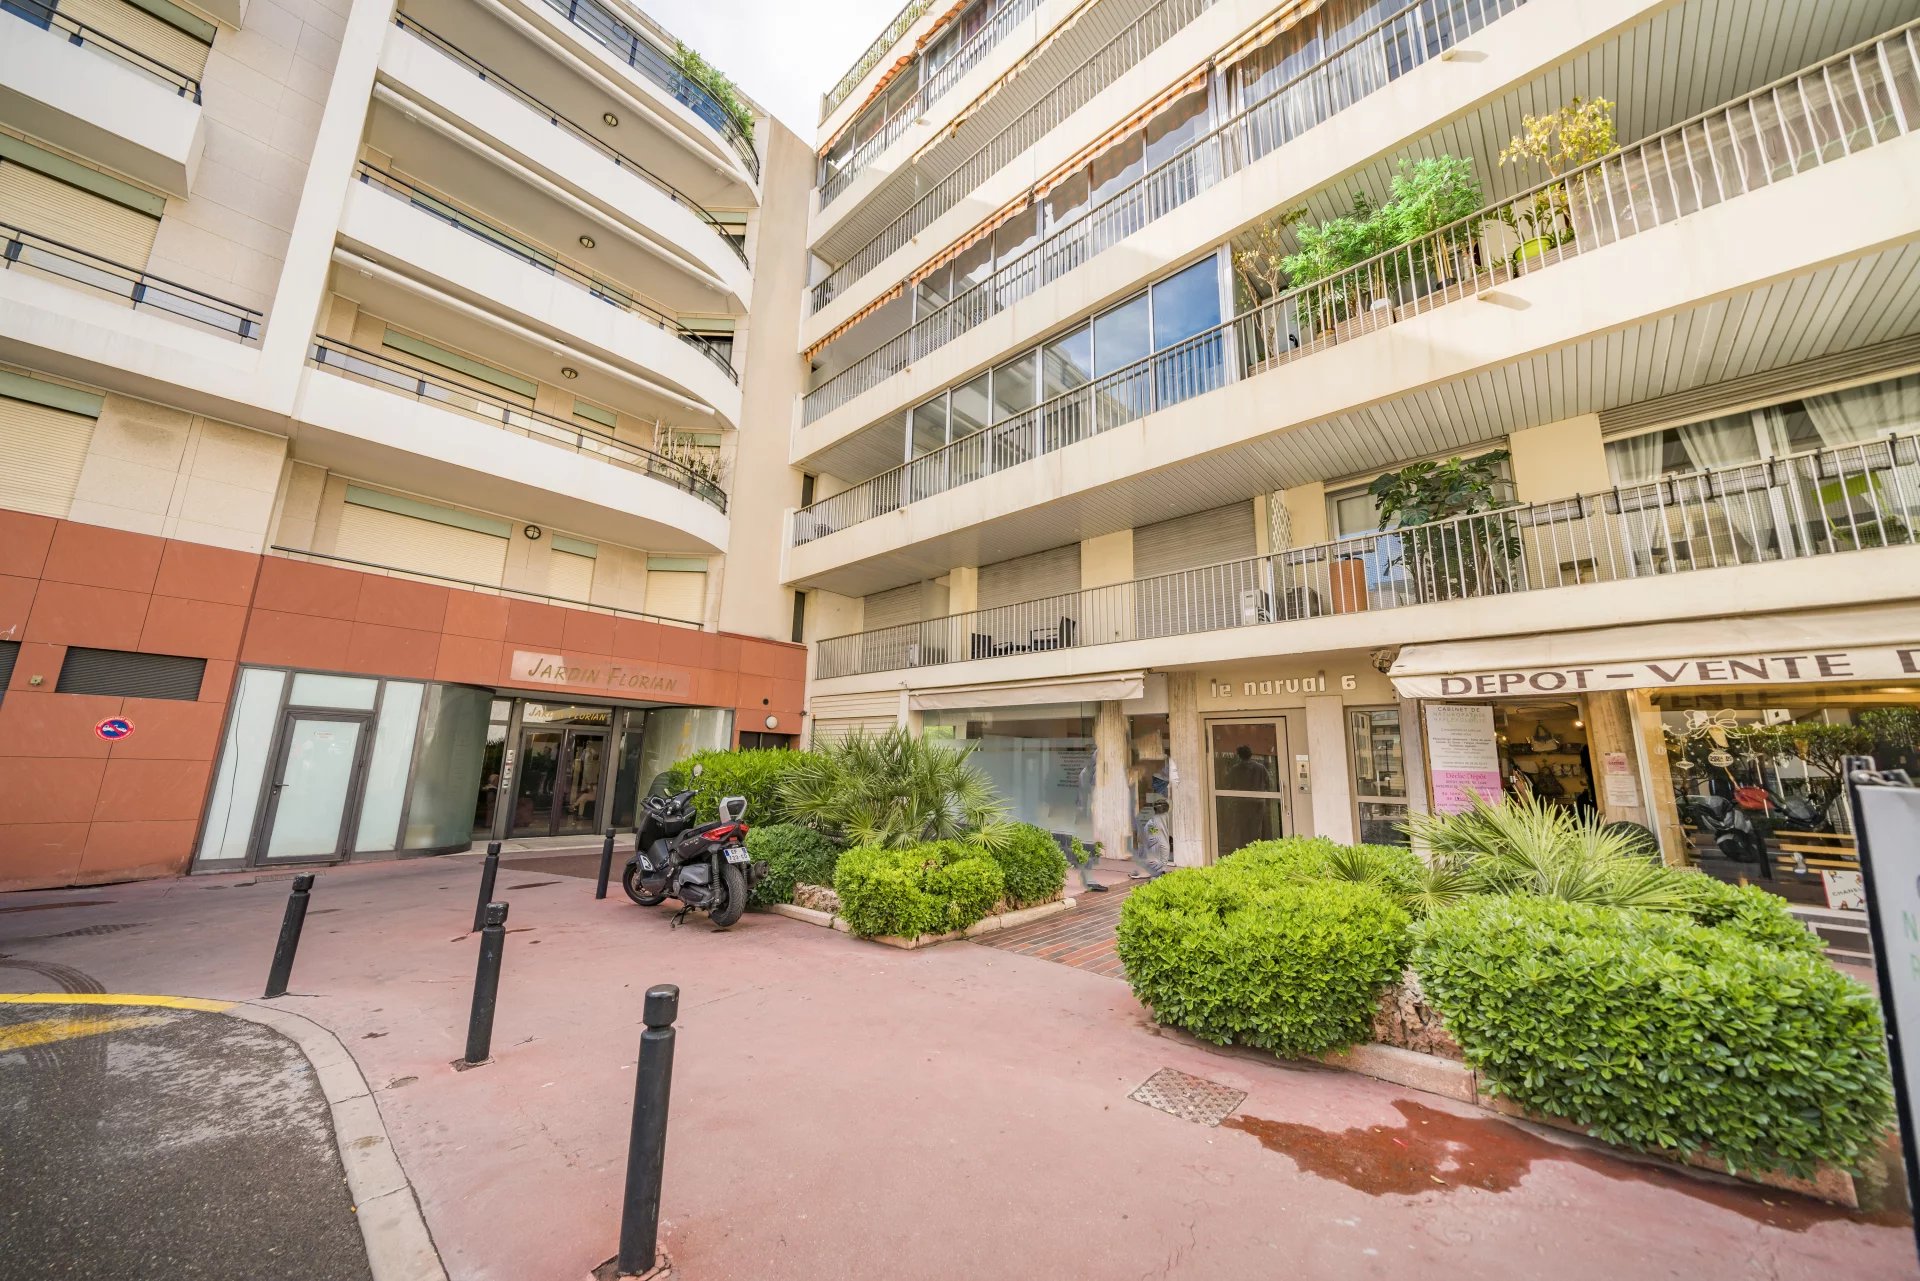 Rental apartment Cannes center, next to Croisette and convention center